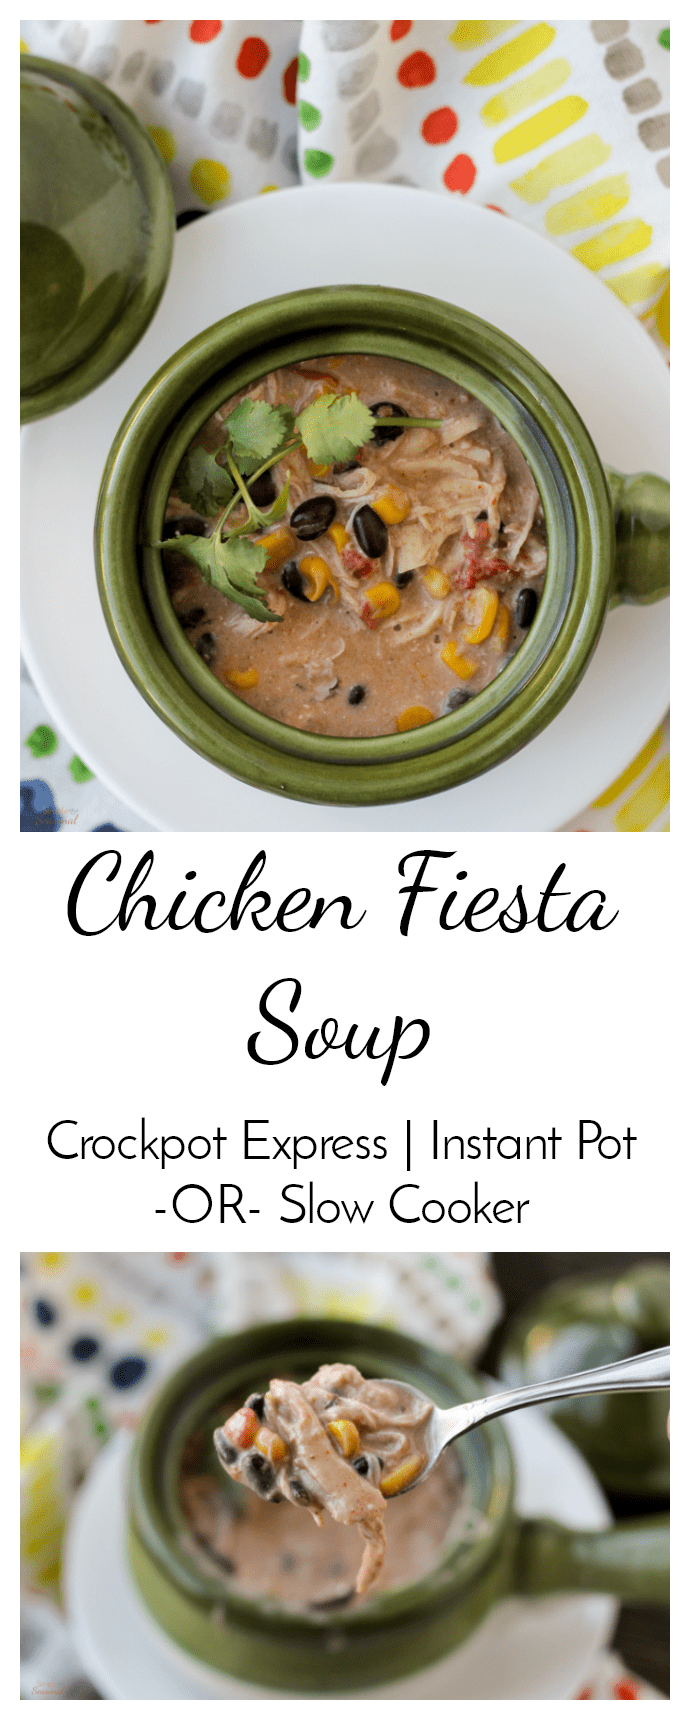 Chicken Fiesta Soup is easy to make and full of delicious flavors! It's a family favorite that can be made in the slow cooker or the pressure cooker. #InstantPot #CrockpotExpress #PressureCooking #Chicken via @nmburk